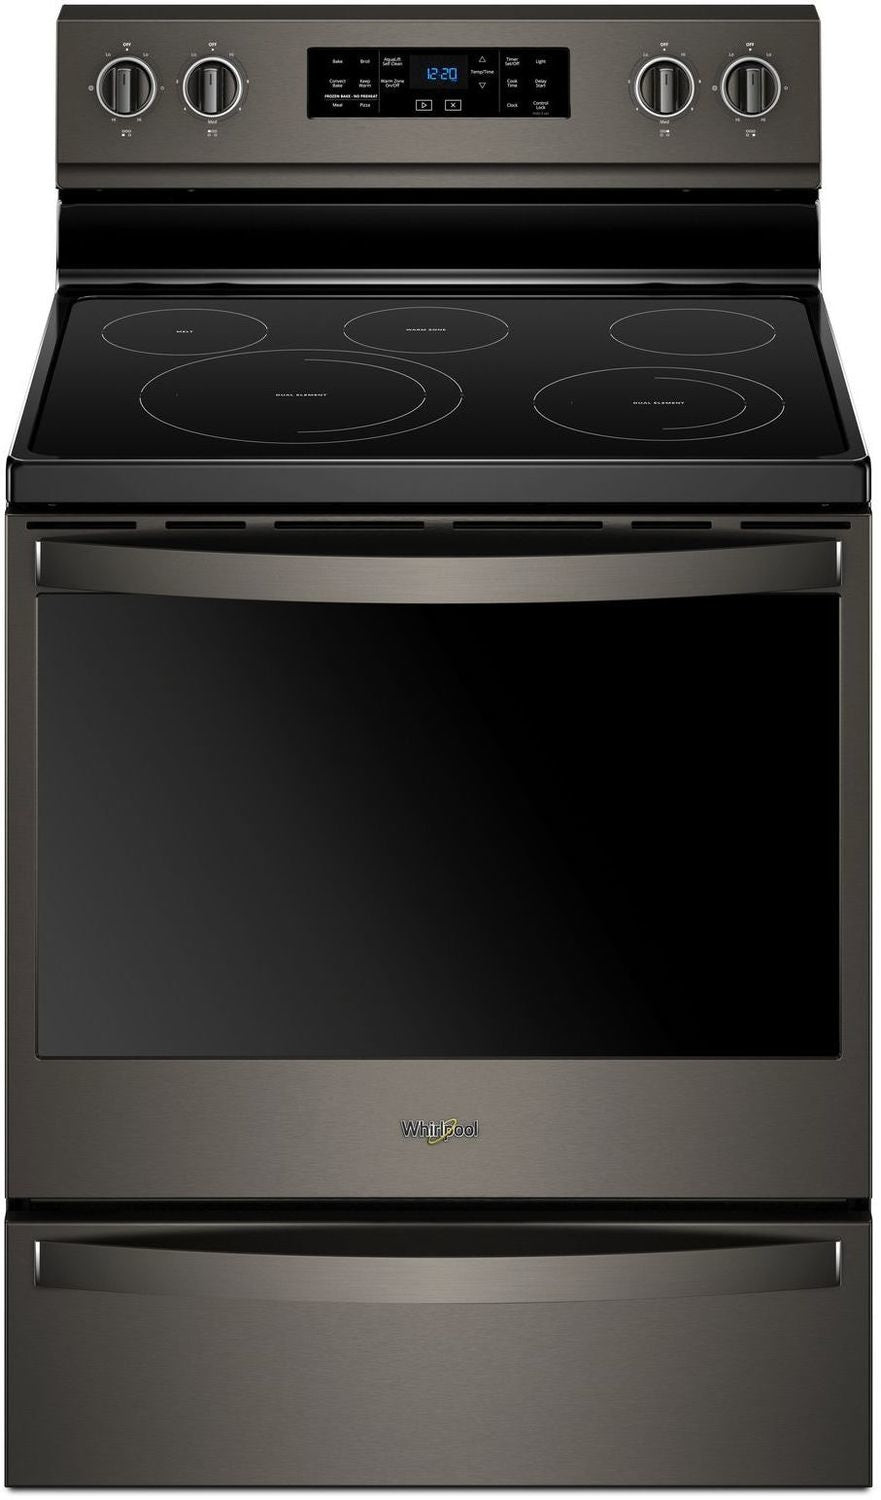 Whirlpool Black Stainless Steel Freestanding Electric Convection Range (6.4 Cu. Ft.) - YWFE775H0HV